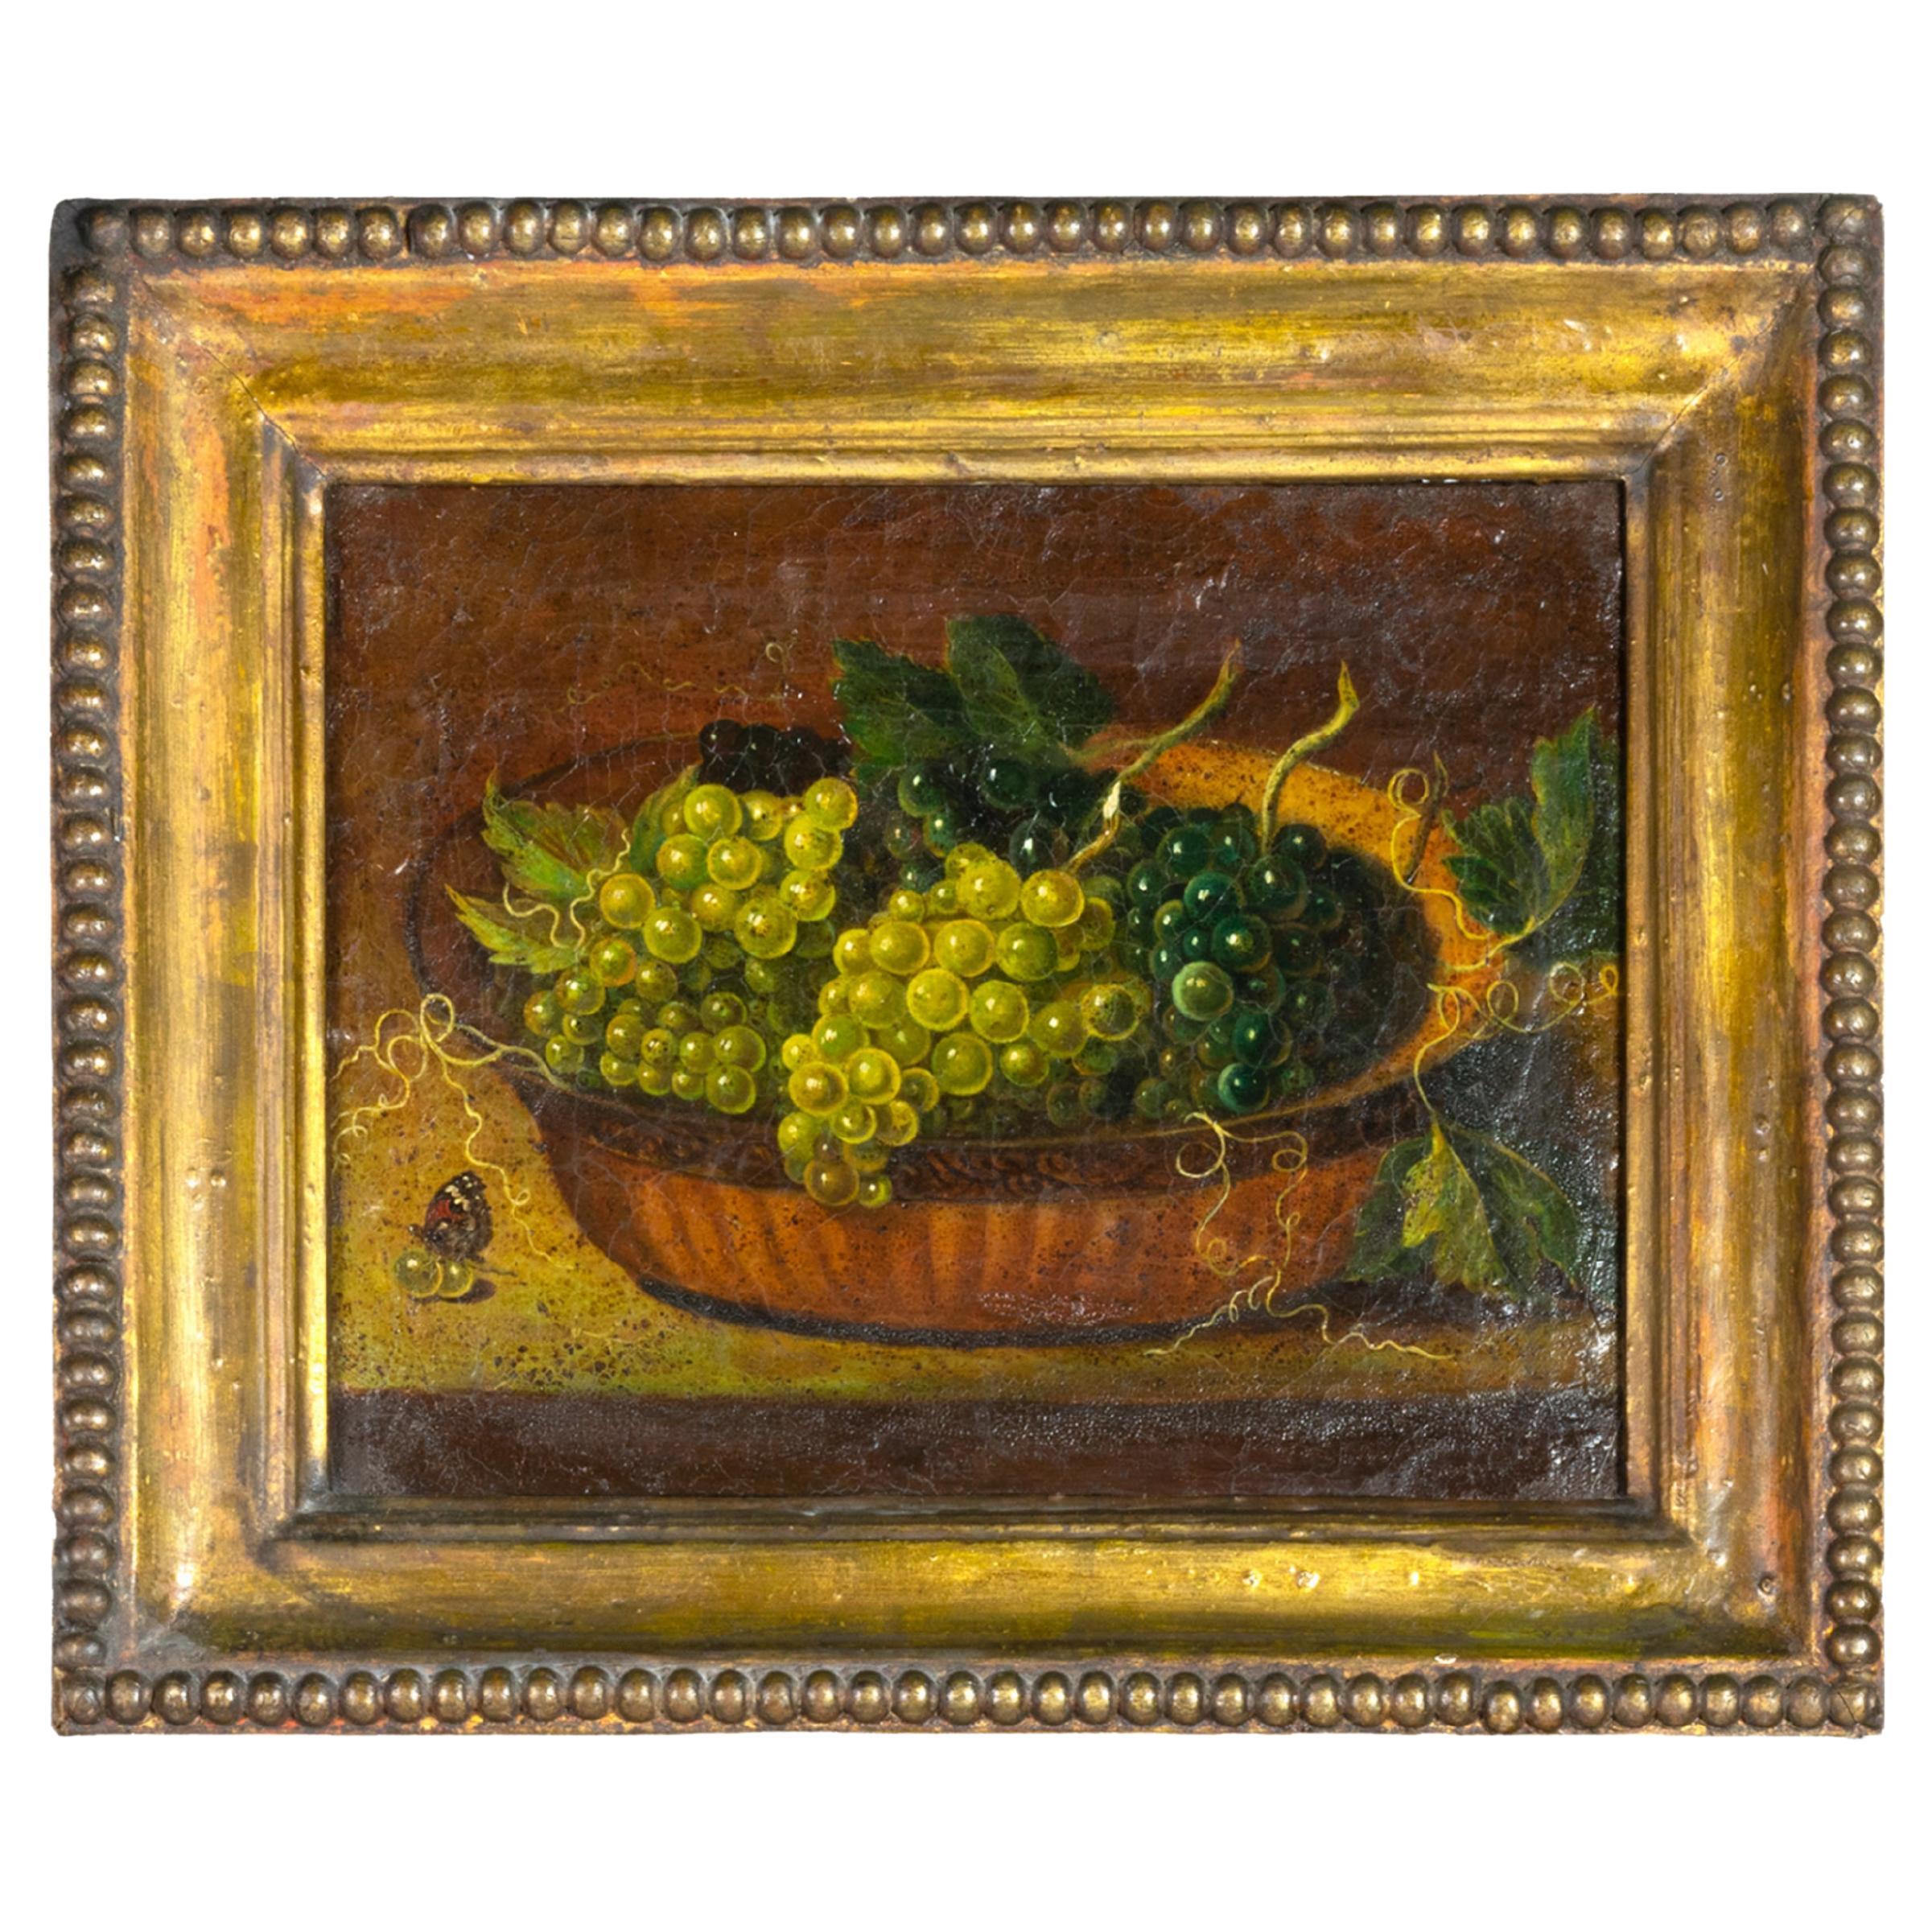 French Still Life Grapes Painting, 19th Century